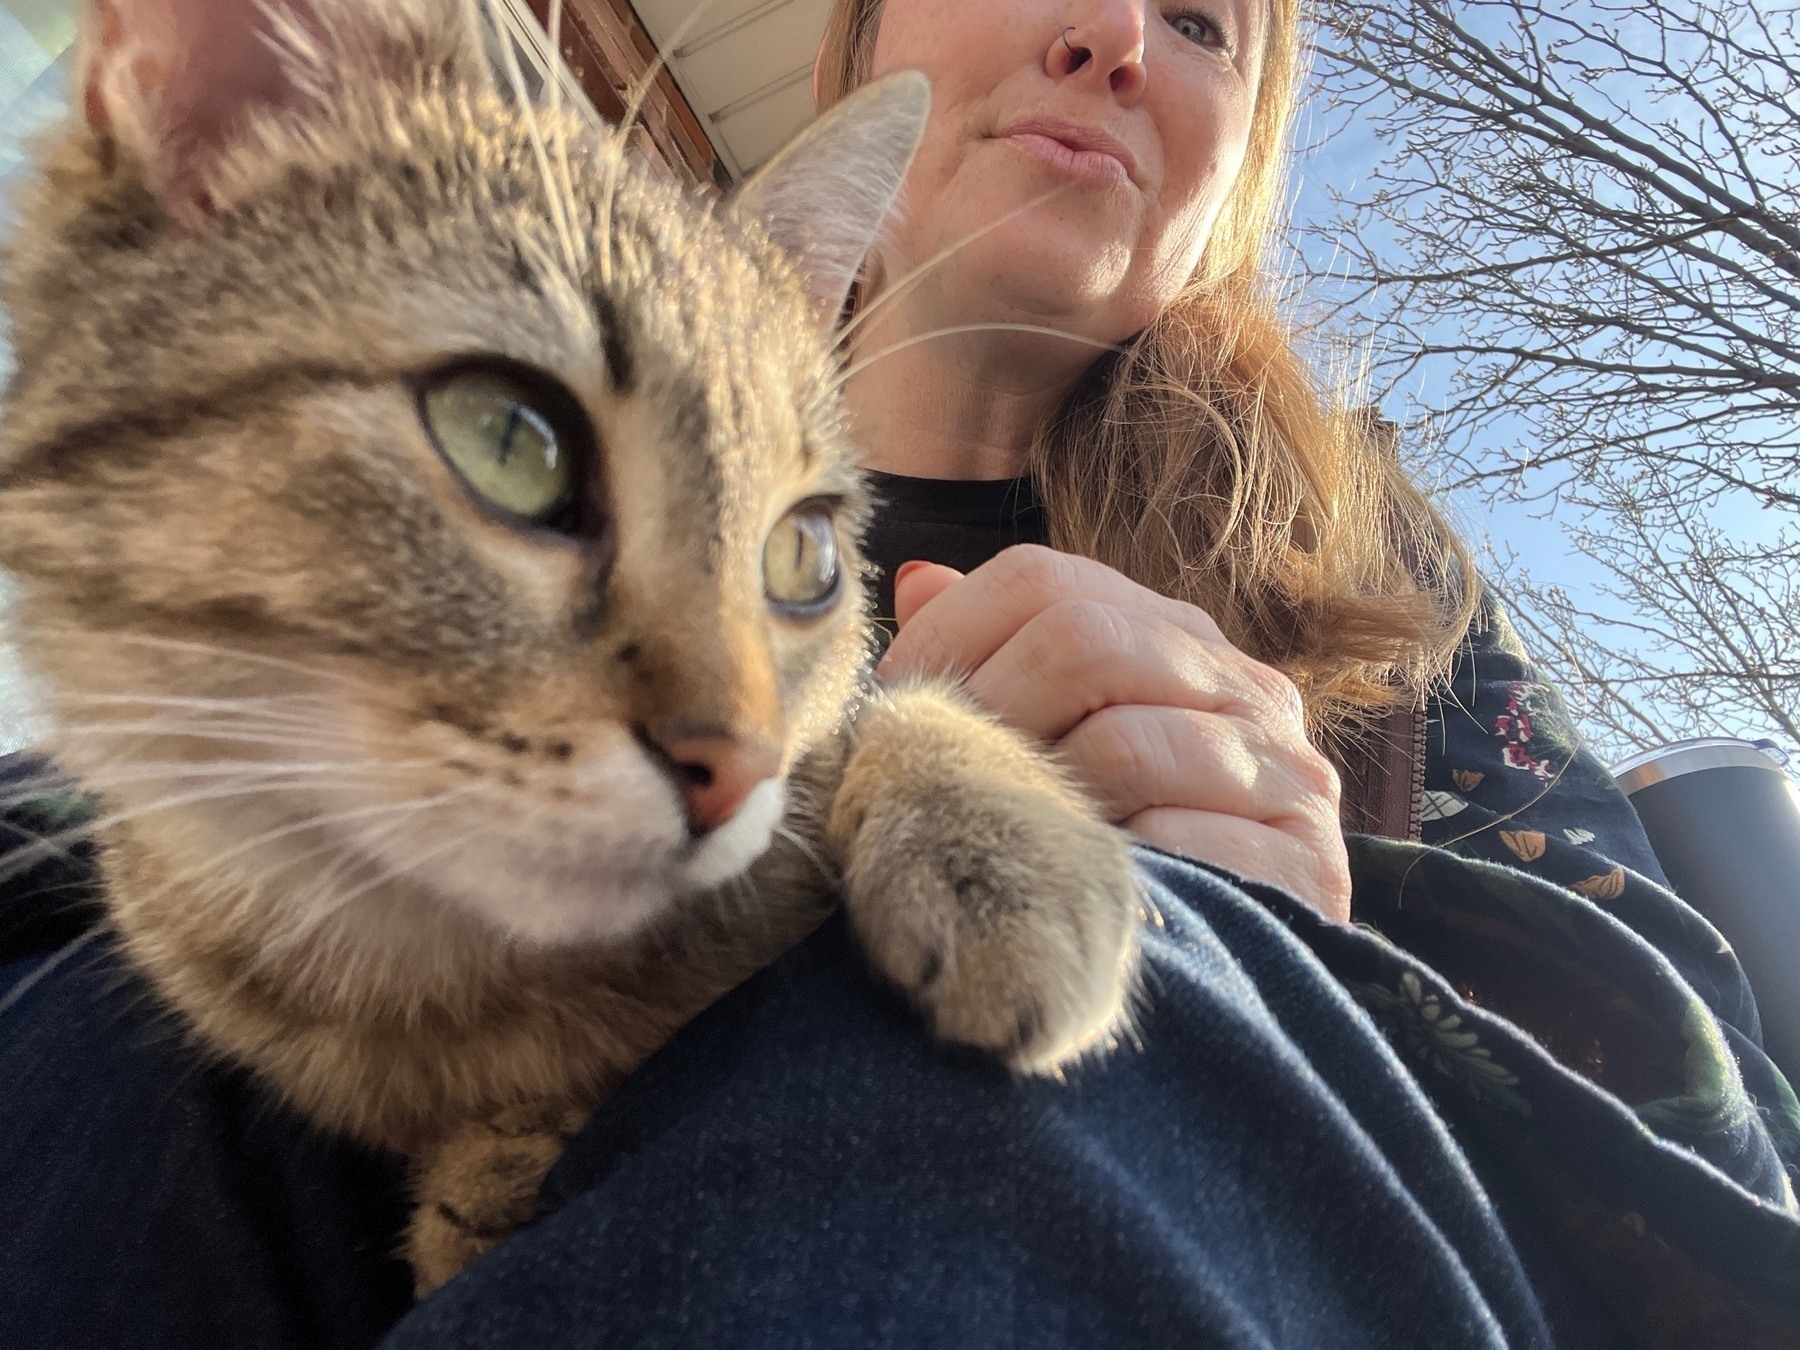 A very close view of a small gray tabby cat with wide eyes looking up from a woman's lap, with sky behind them 